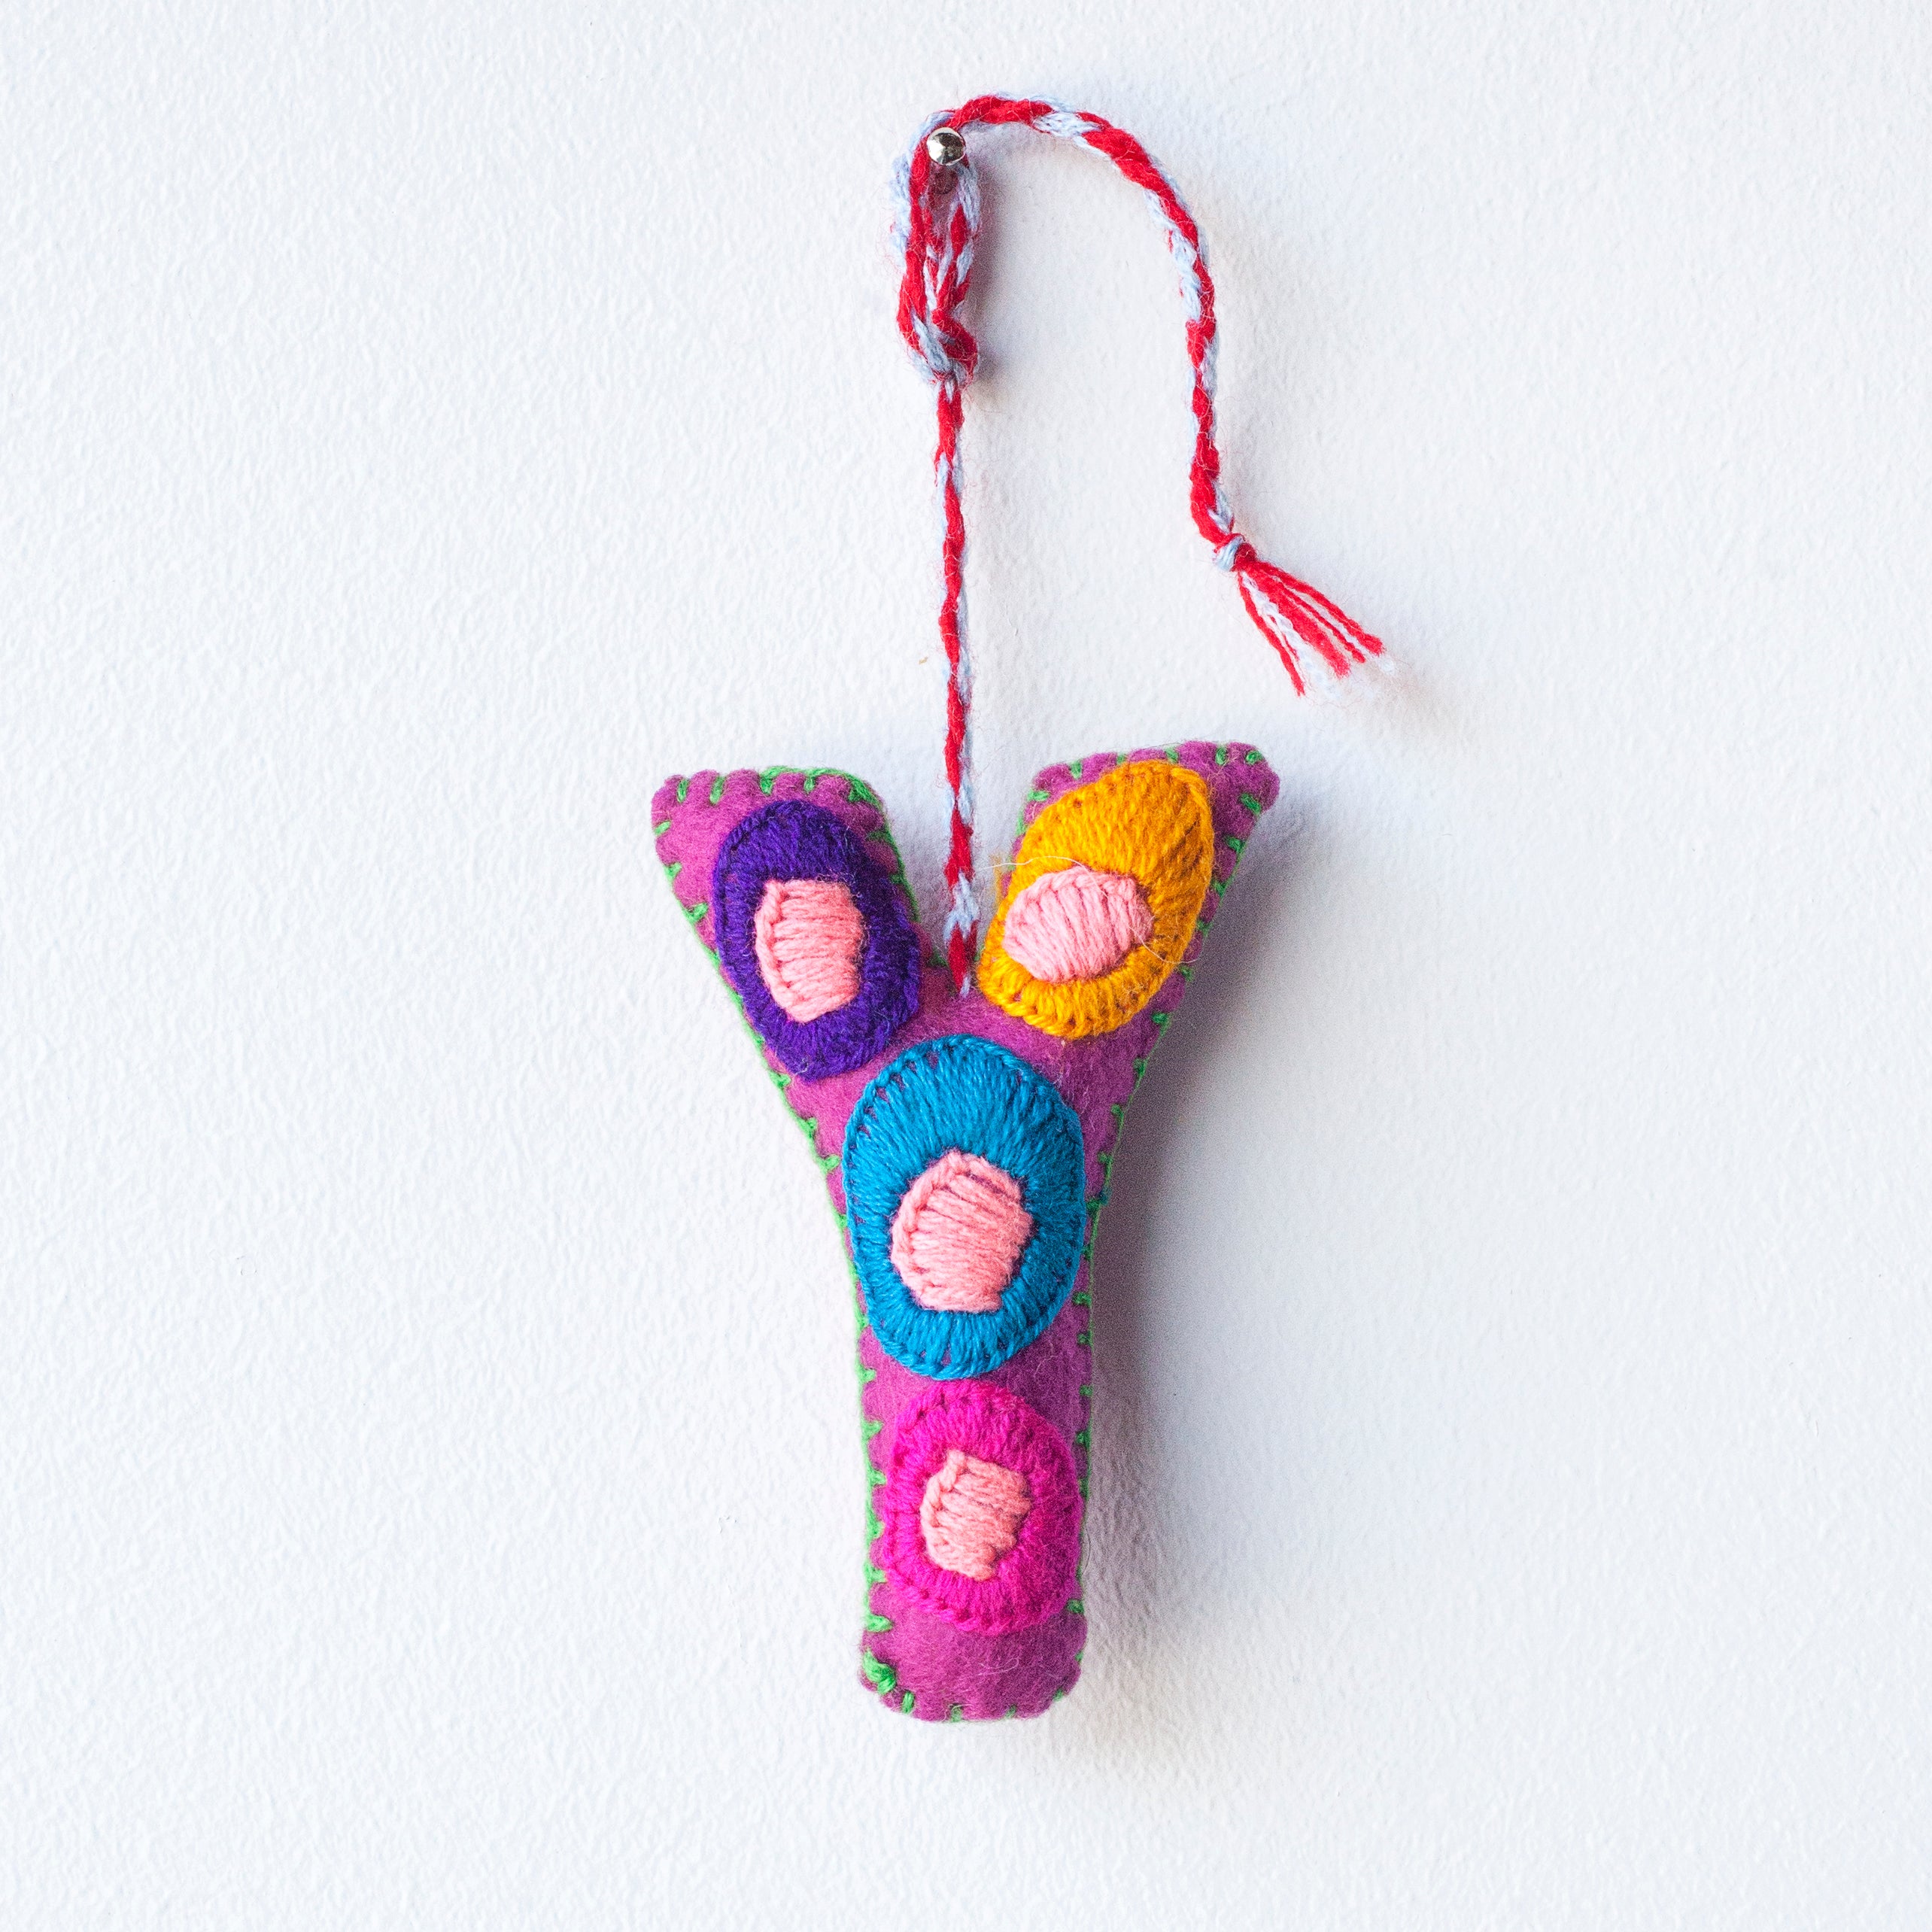 Colorful felt letter "Y" with multicolor floral hand-embroidery hanging by a colorful string.